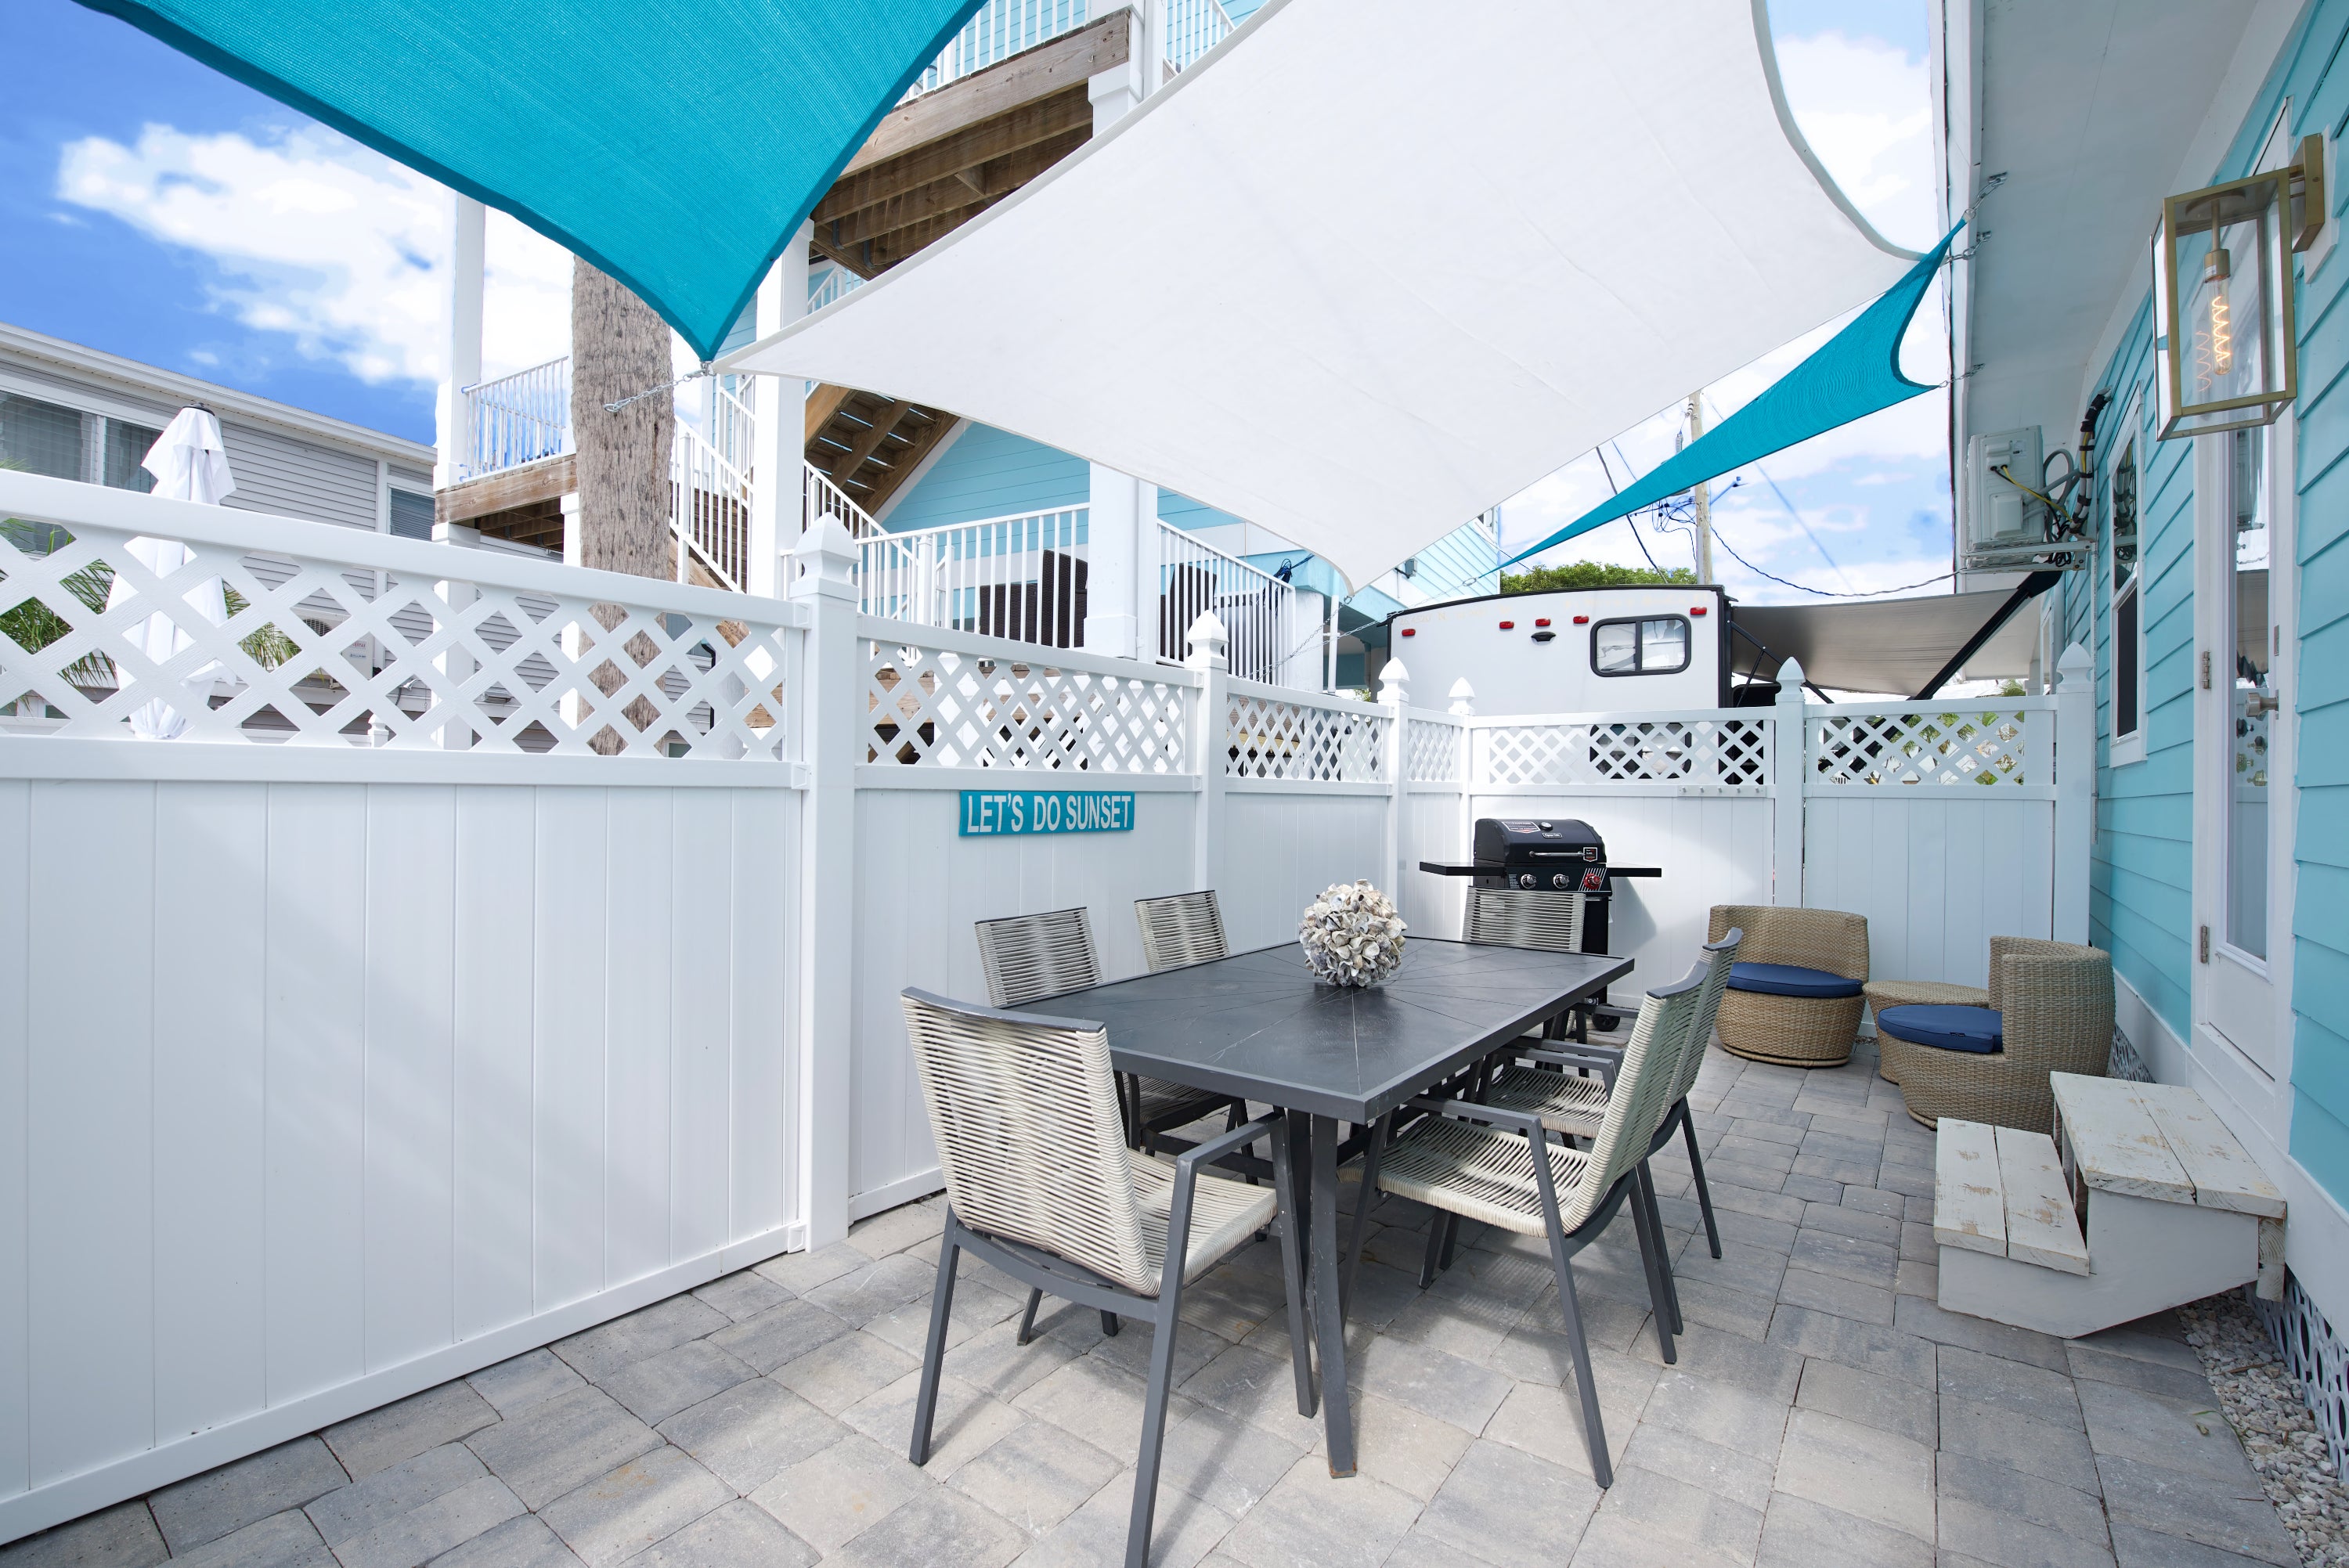 Outdoor dining with grill and seating